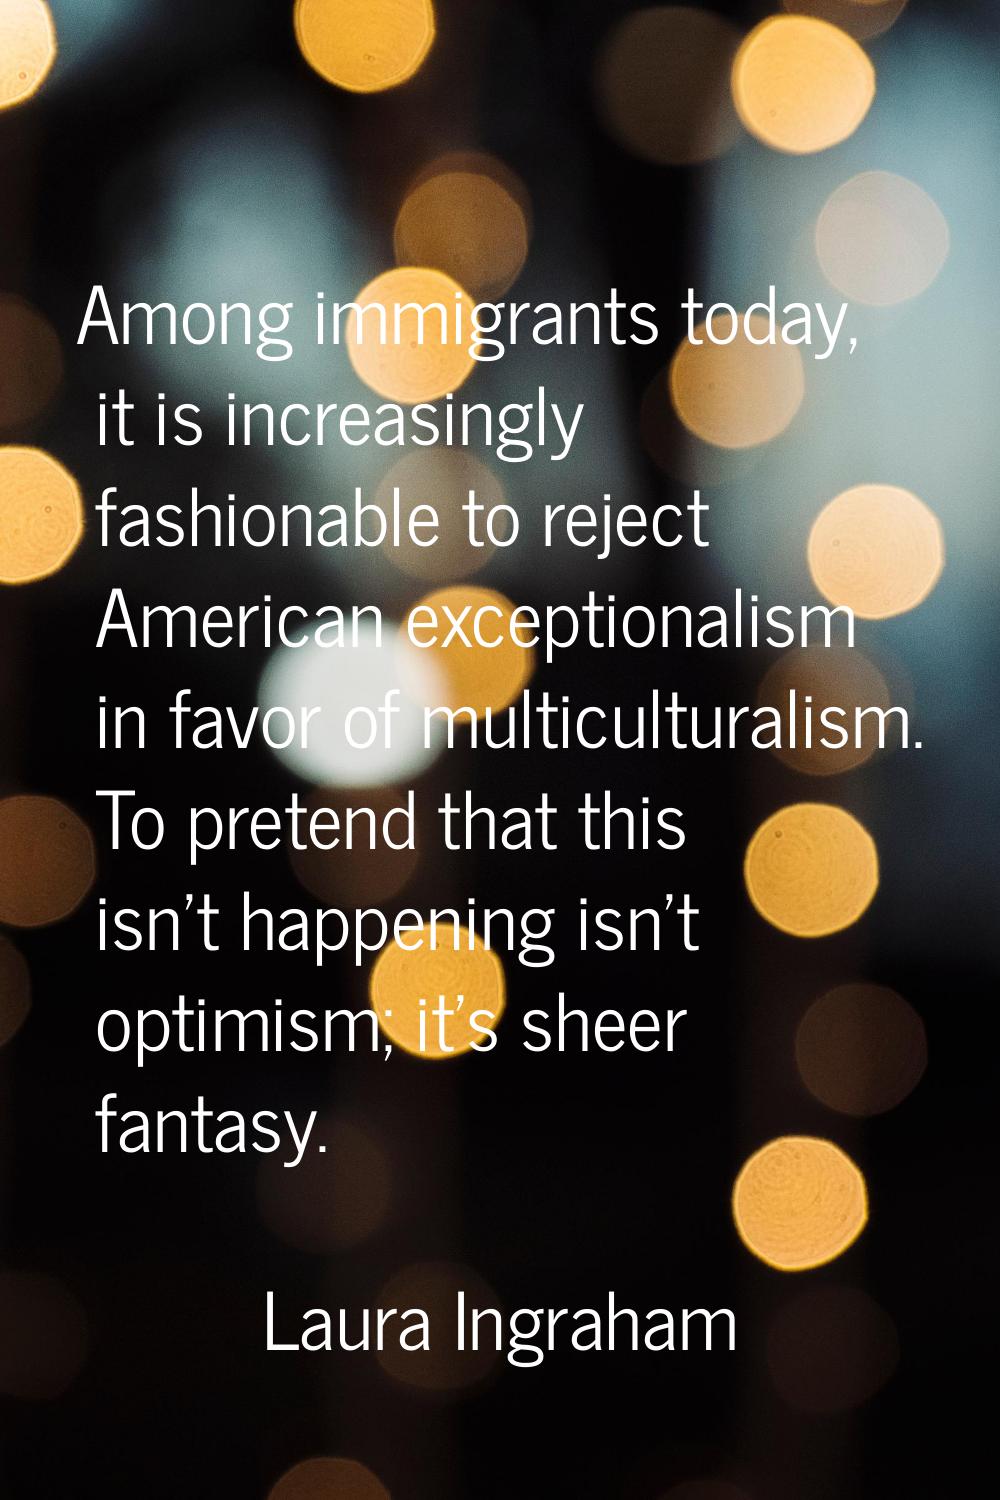 Among immigrants today, it is increasingly fashionable to reject American exceptionalism in favor o